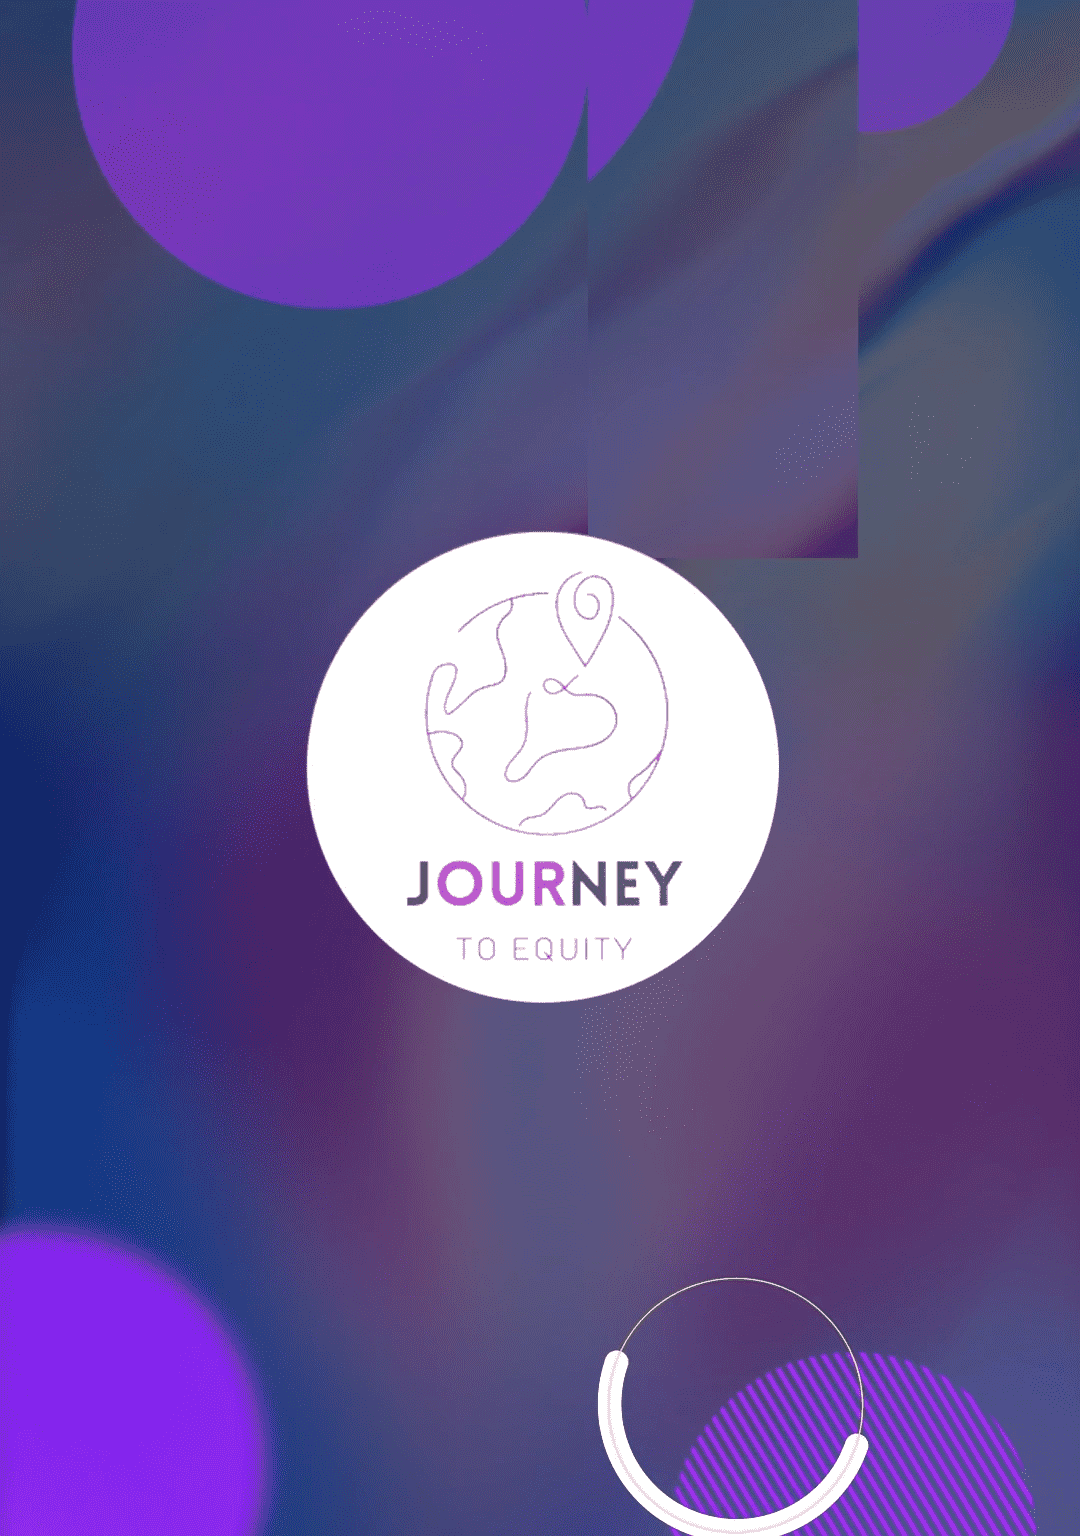 Crafting a Resonant Podcast Experience for “Our Journey to Equity”